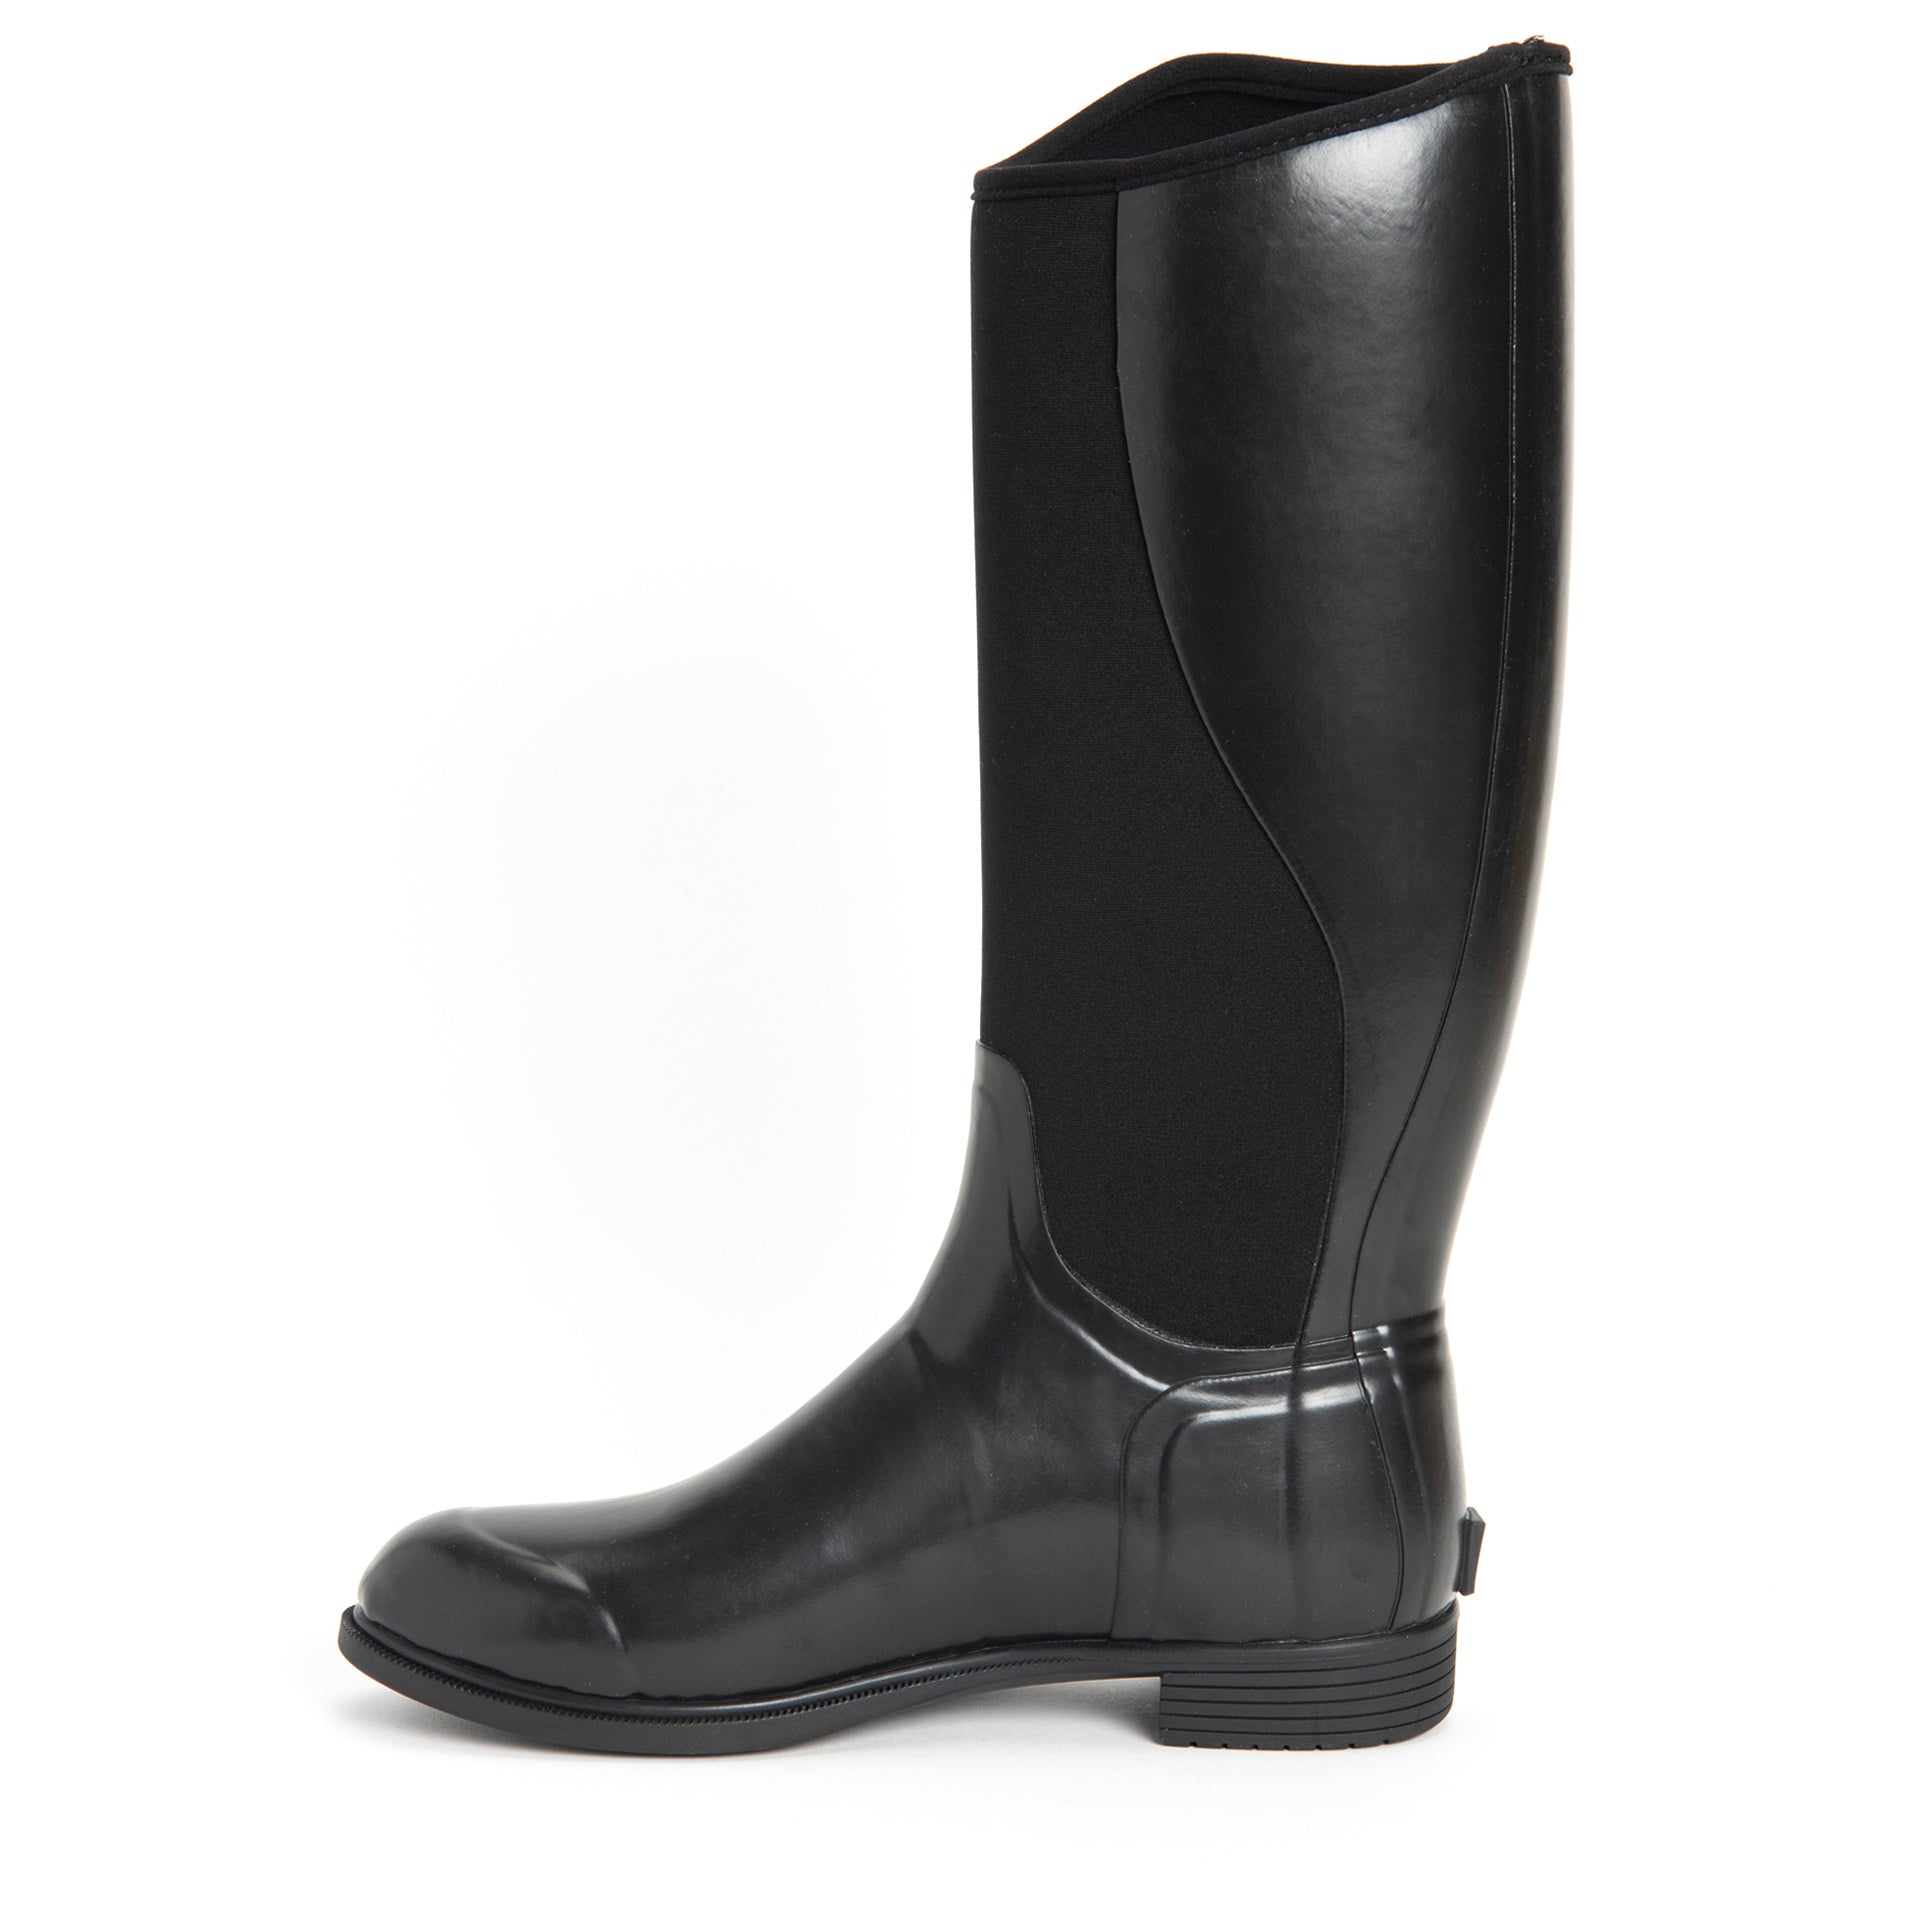 Women's Derby Equestrian Tall Boot | The Original Muck Boot Company™ Canada